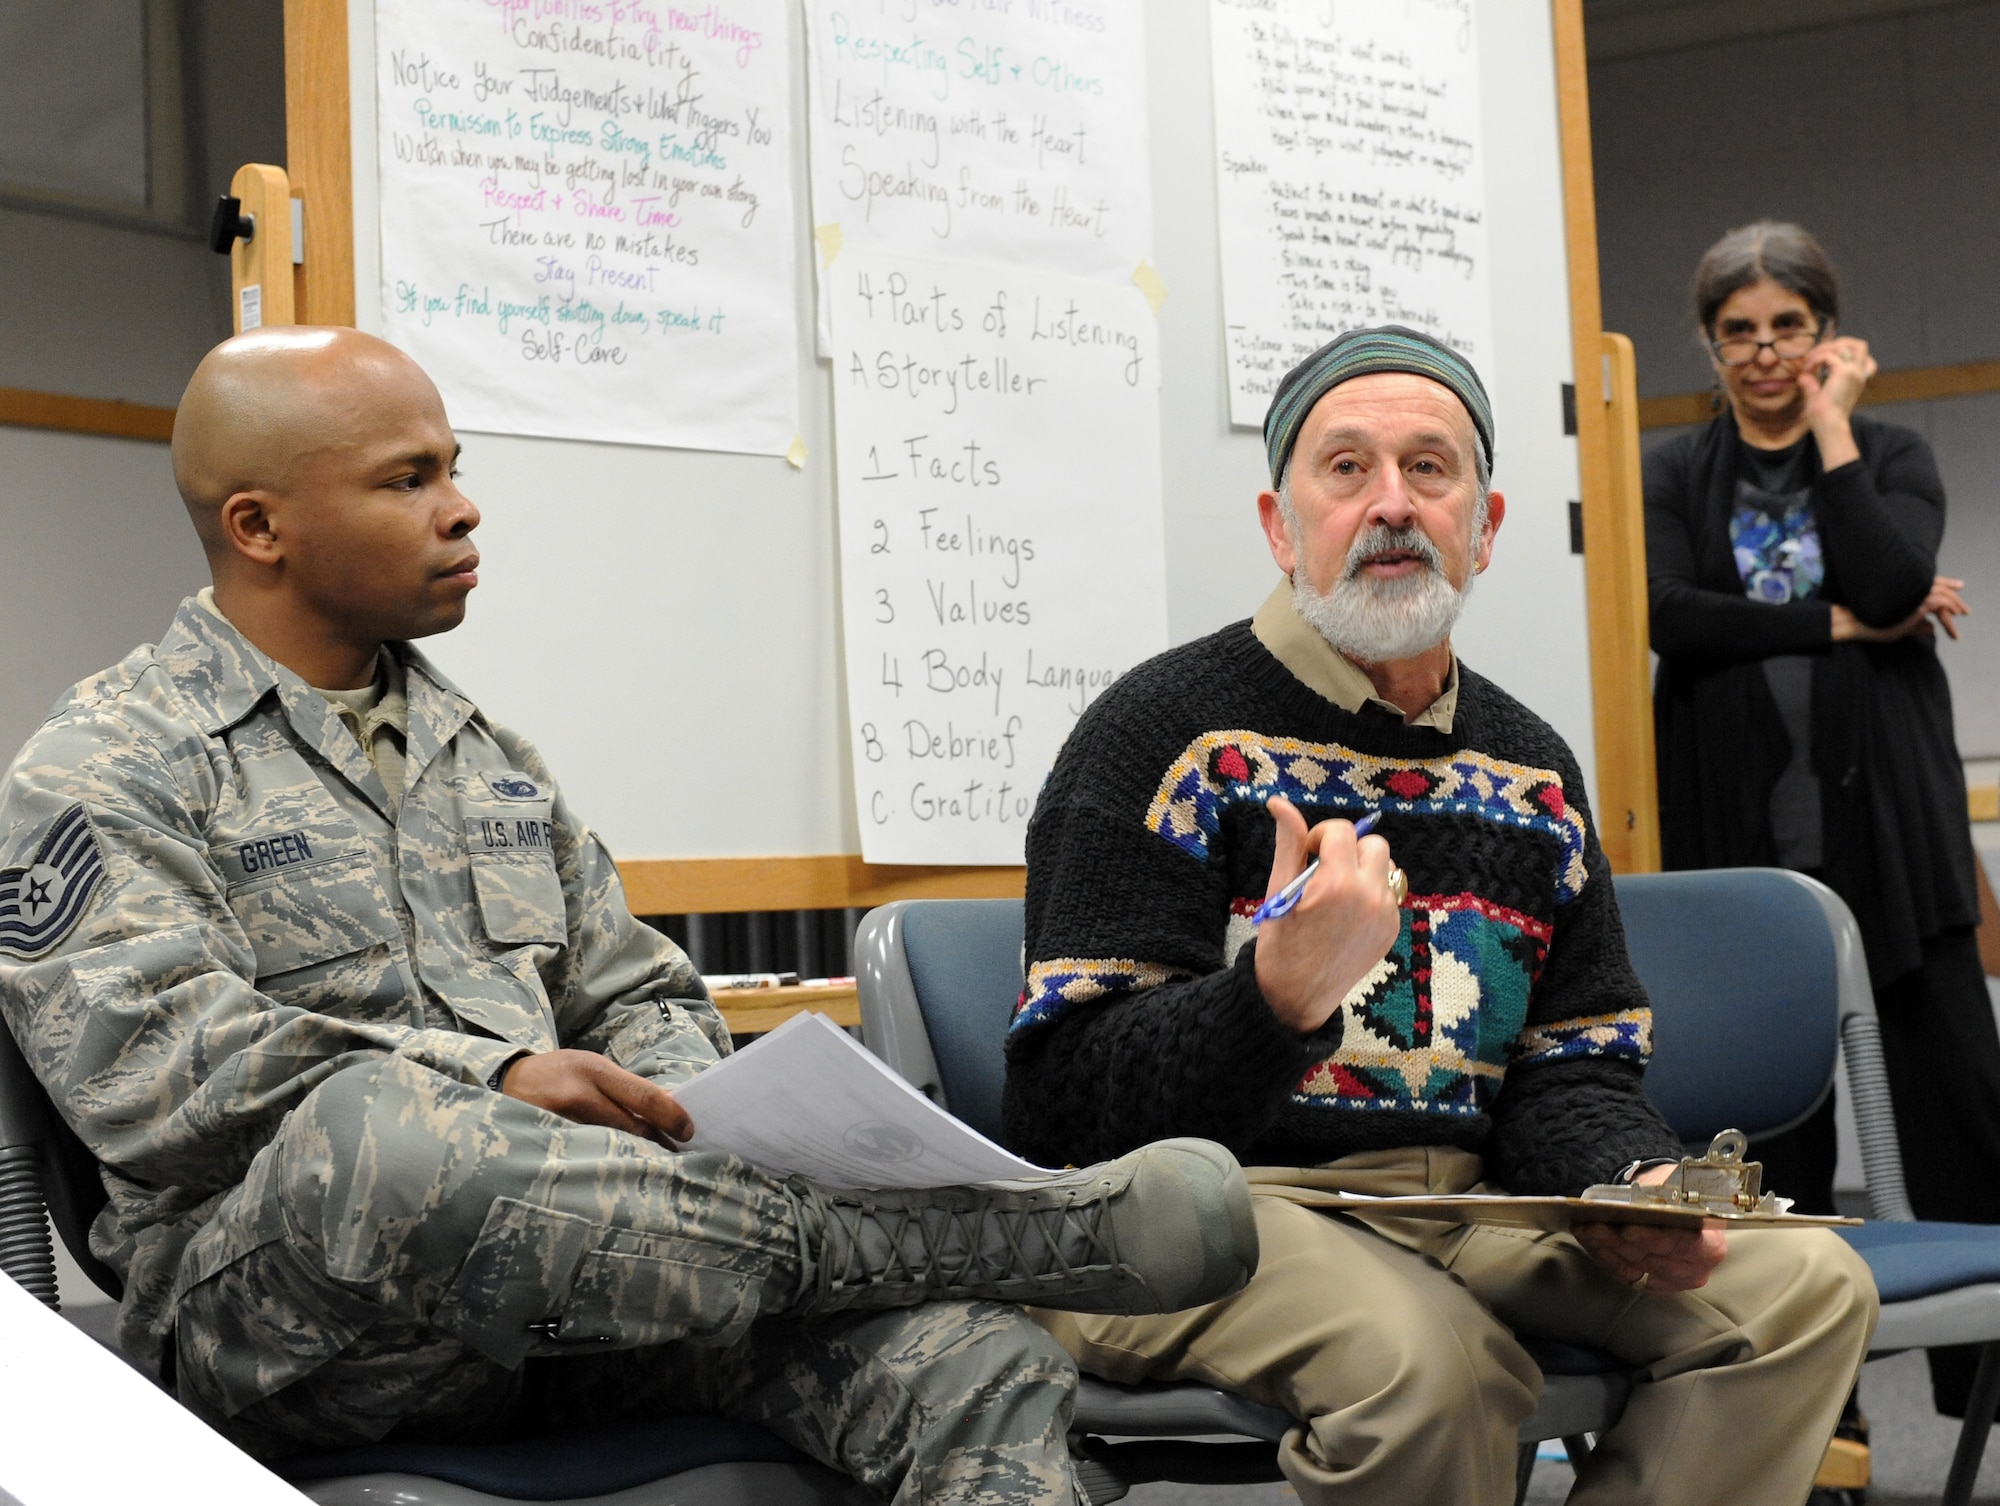 Oregon Air National Guard Tech. Sgt. Carl Green, co-chair of the 142nd Fighter Wing’s Diversity and Inclusion Counsel, left, listens to Alan Winter, center, along with Joan Levine, right, lead a discussion in compassionate listening, Feb. 8, 2015, Portland Air National Guard Base, Ore. The Diversity and Inclusion Counsel helps foster communication by recognizing that a diverse set of experiences, perspectives, and backgrounds are crucial to mission success. (U.S. Air National Guard photo by Tech. Sgt. John Hughel, 142nd Fighter Wing Public Affairs/Released)